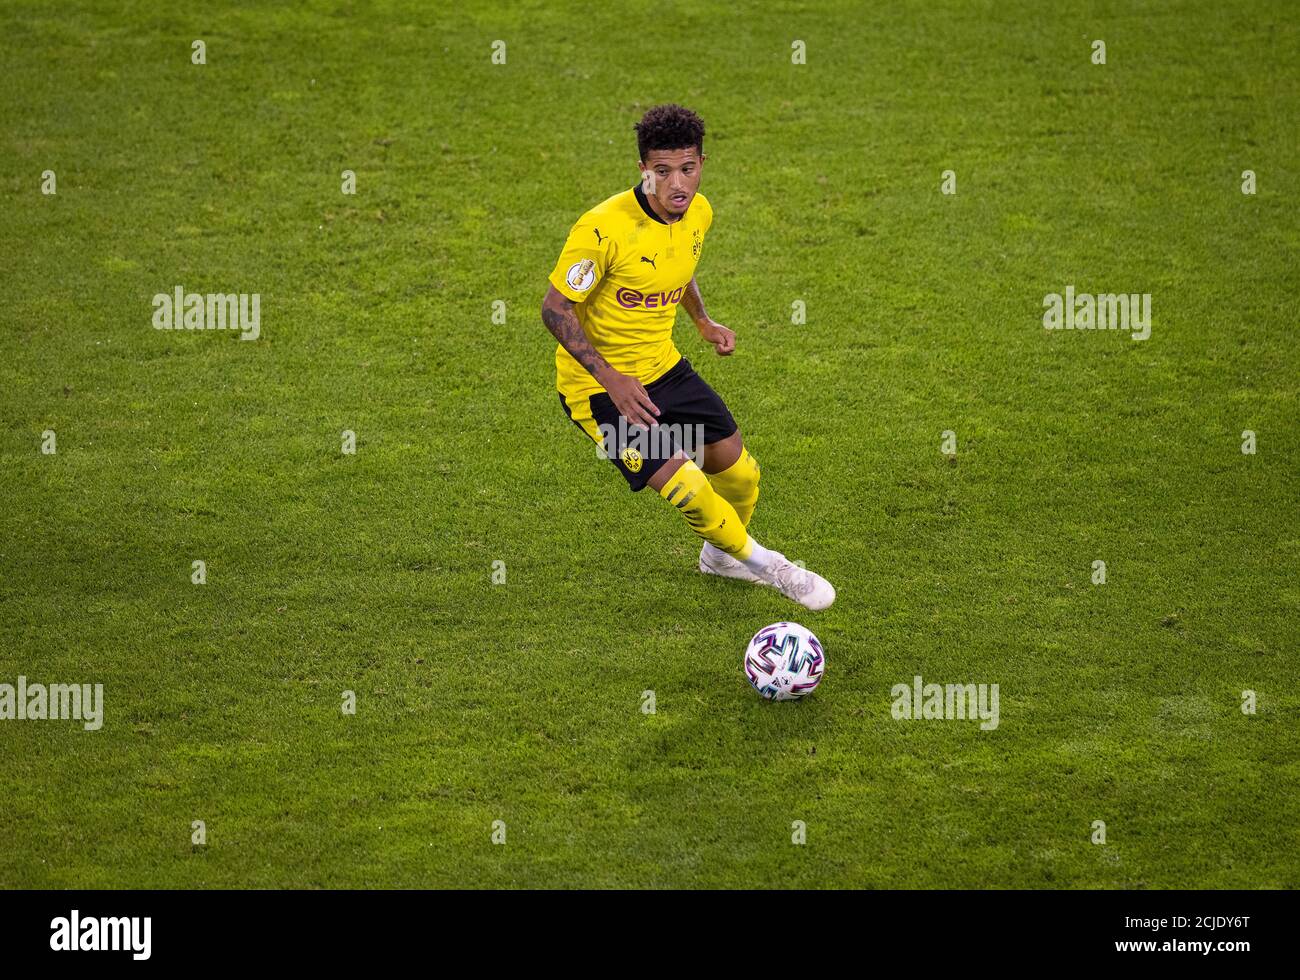 Msv Duisburg Bvb High Resolution Stock Photography and Images - Alamy